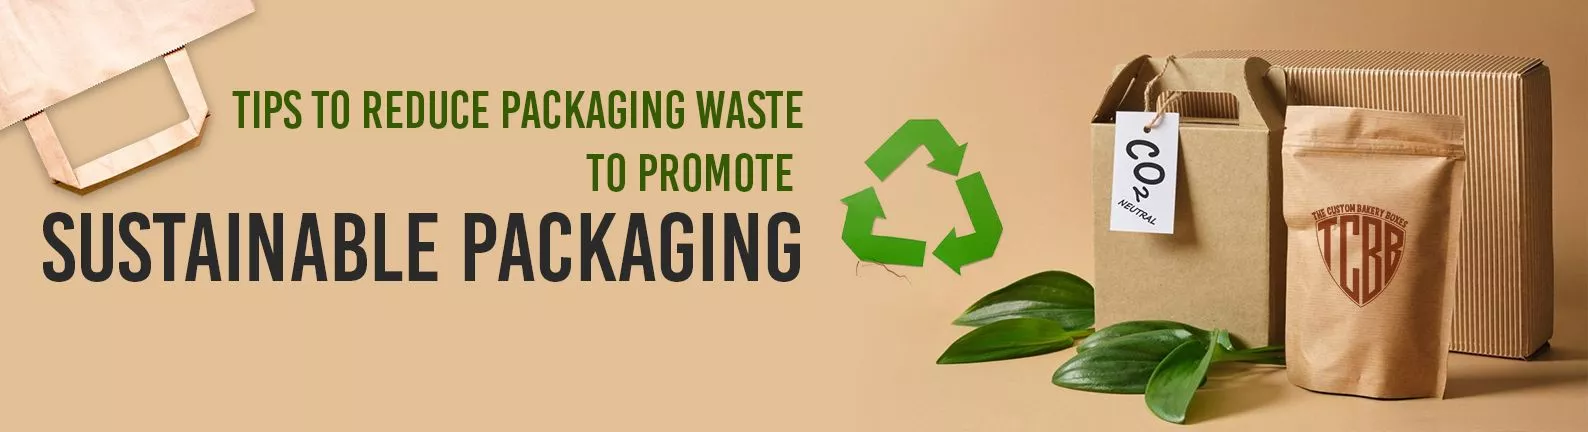 Tips To Reduce Packaging Waste To Promote Sustainable Packaging